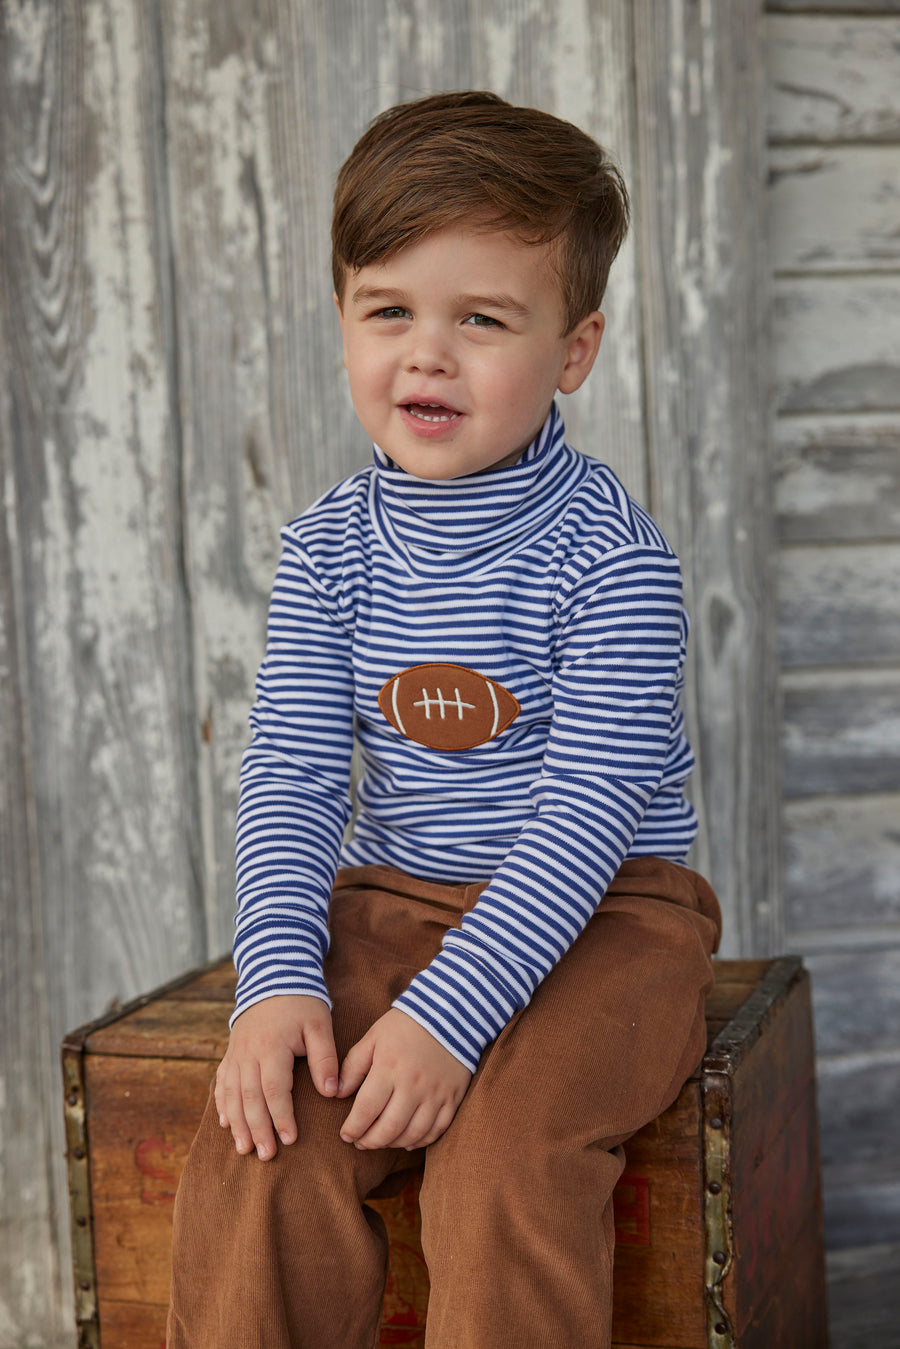 Little English toddler boy classic children’s apparel blue and white stripe knit turtleneck with football applique on chest 